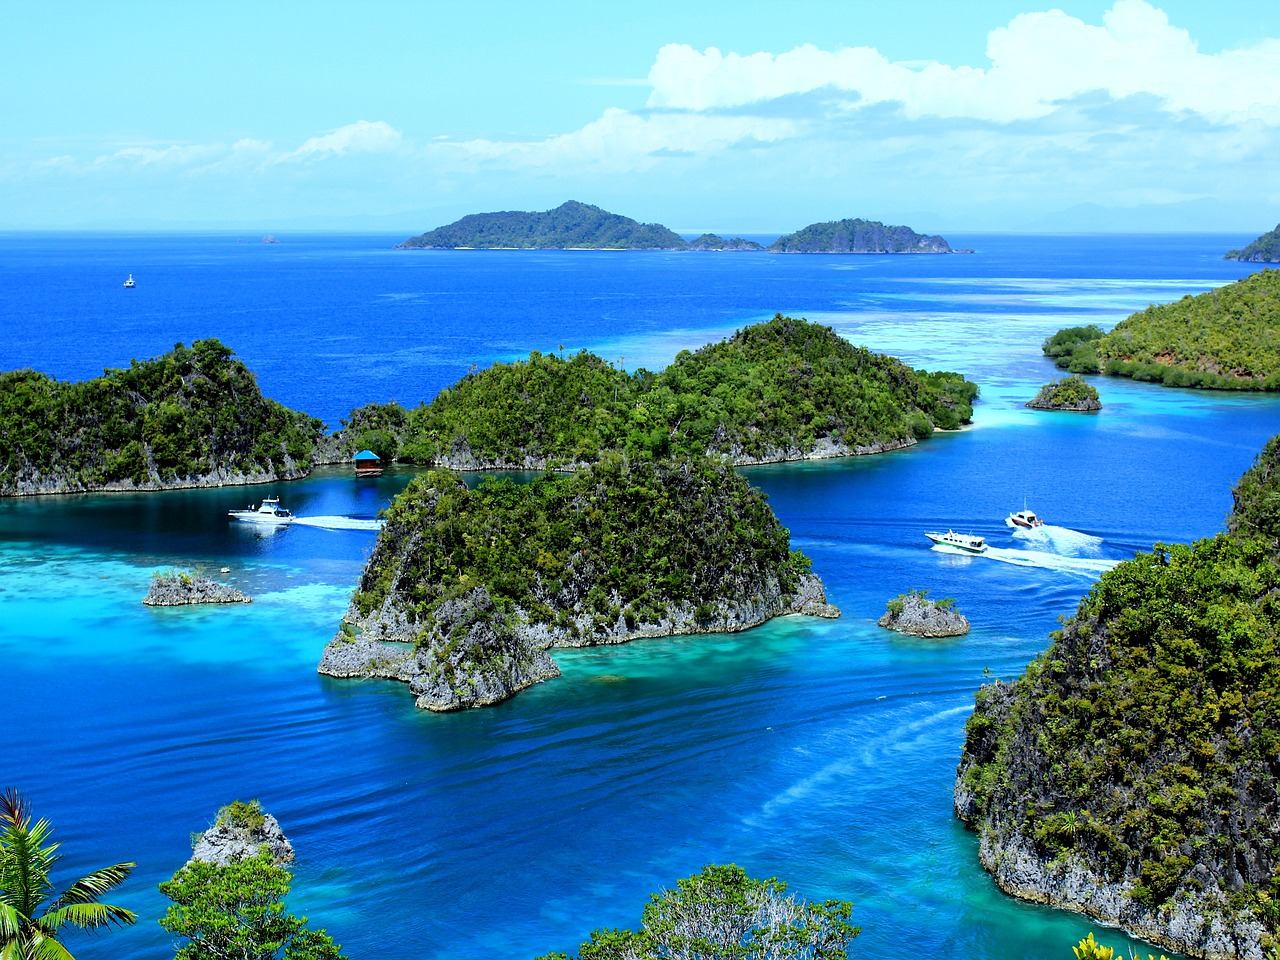 Ultimate Scuba Diving and Gastronomic Experience in Raja Ampat